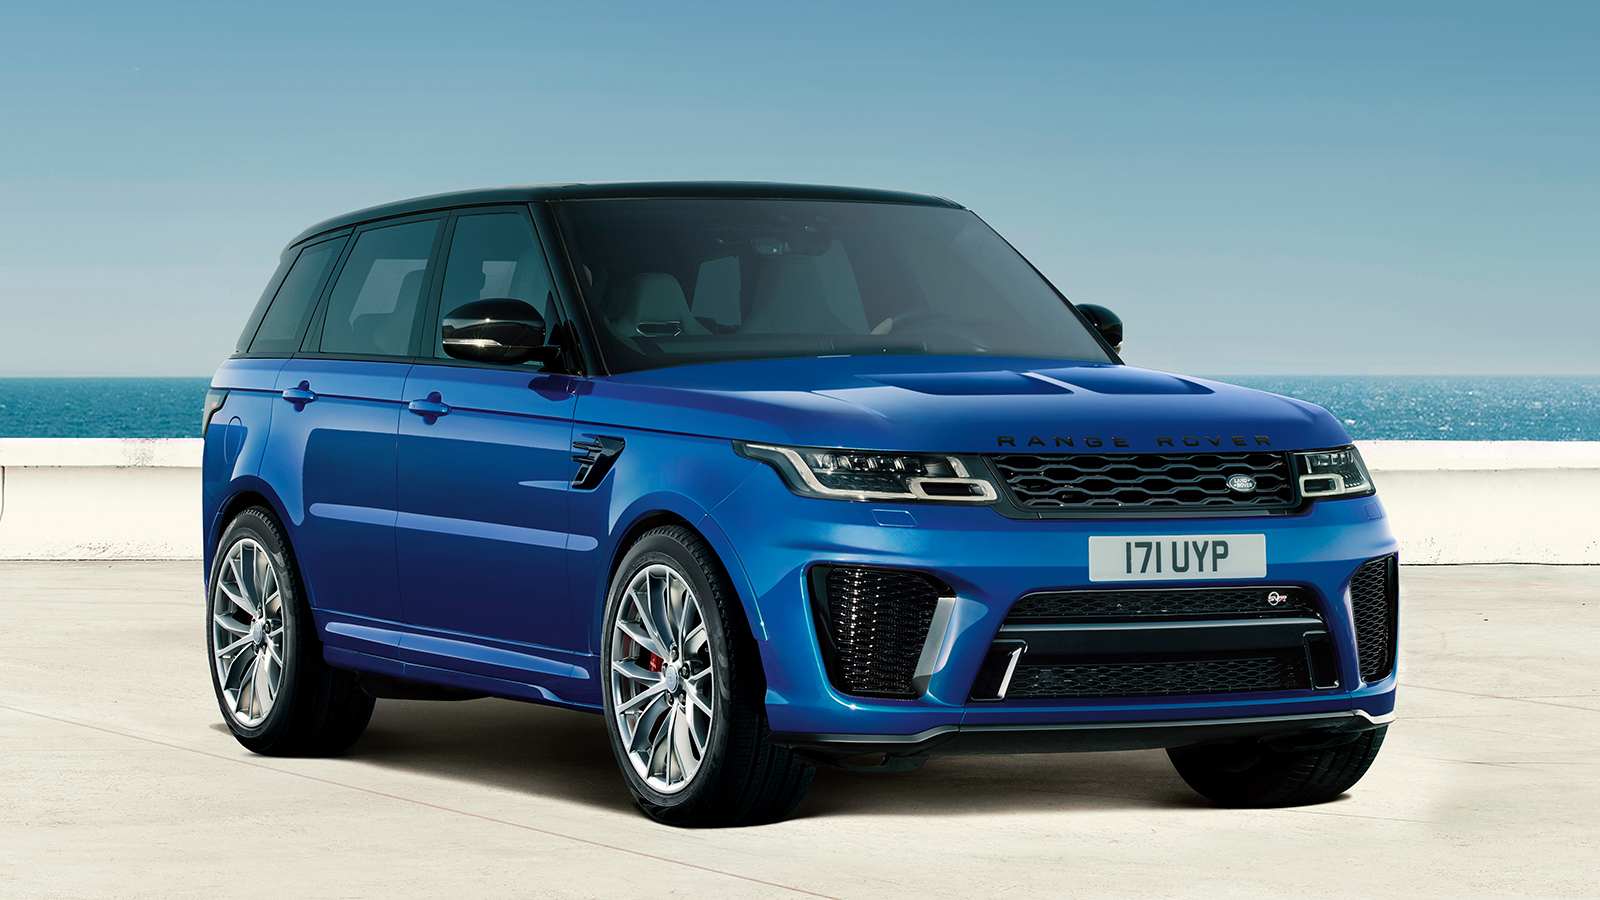 You are currently viewing Facelifted Range Rover Sport SVR launched in India, priced from Rs 2.19 crore- Technology News, FP